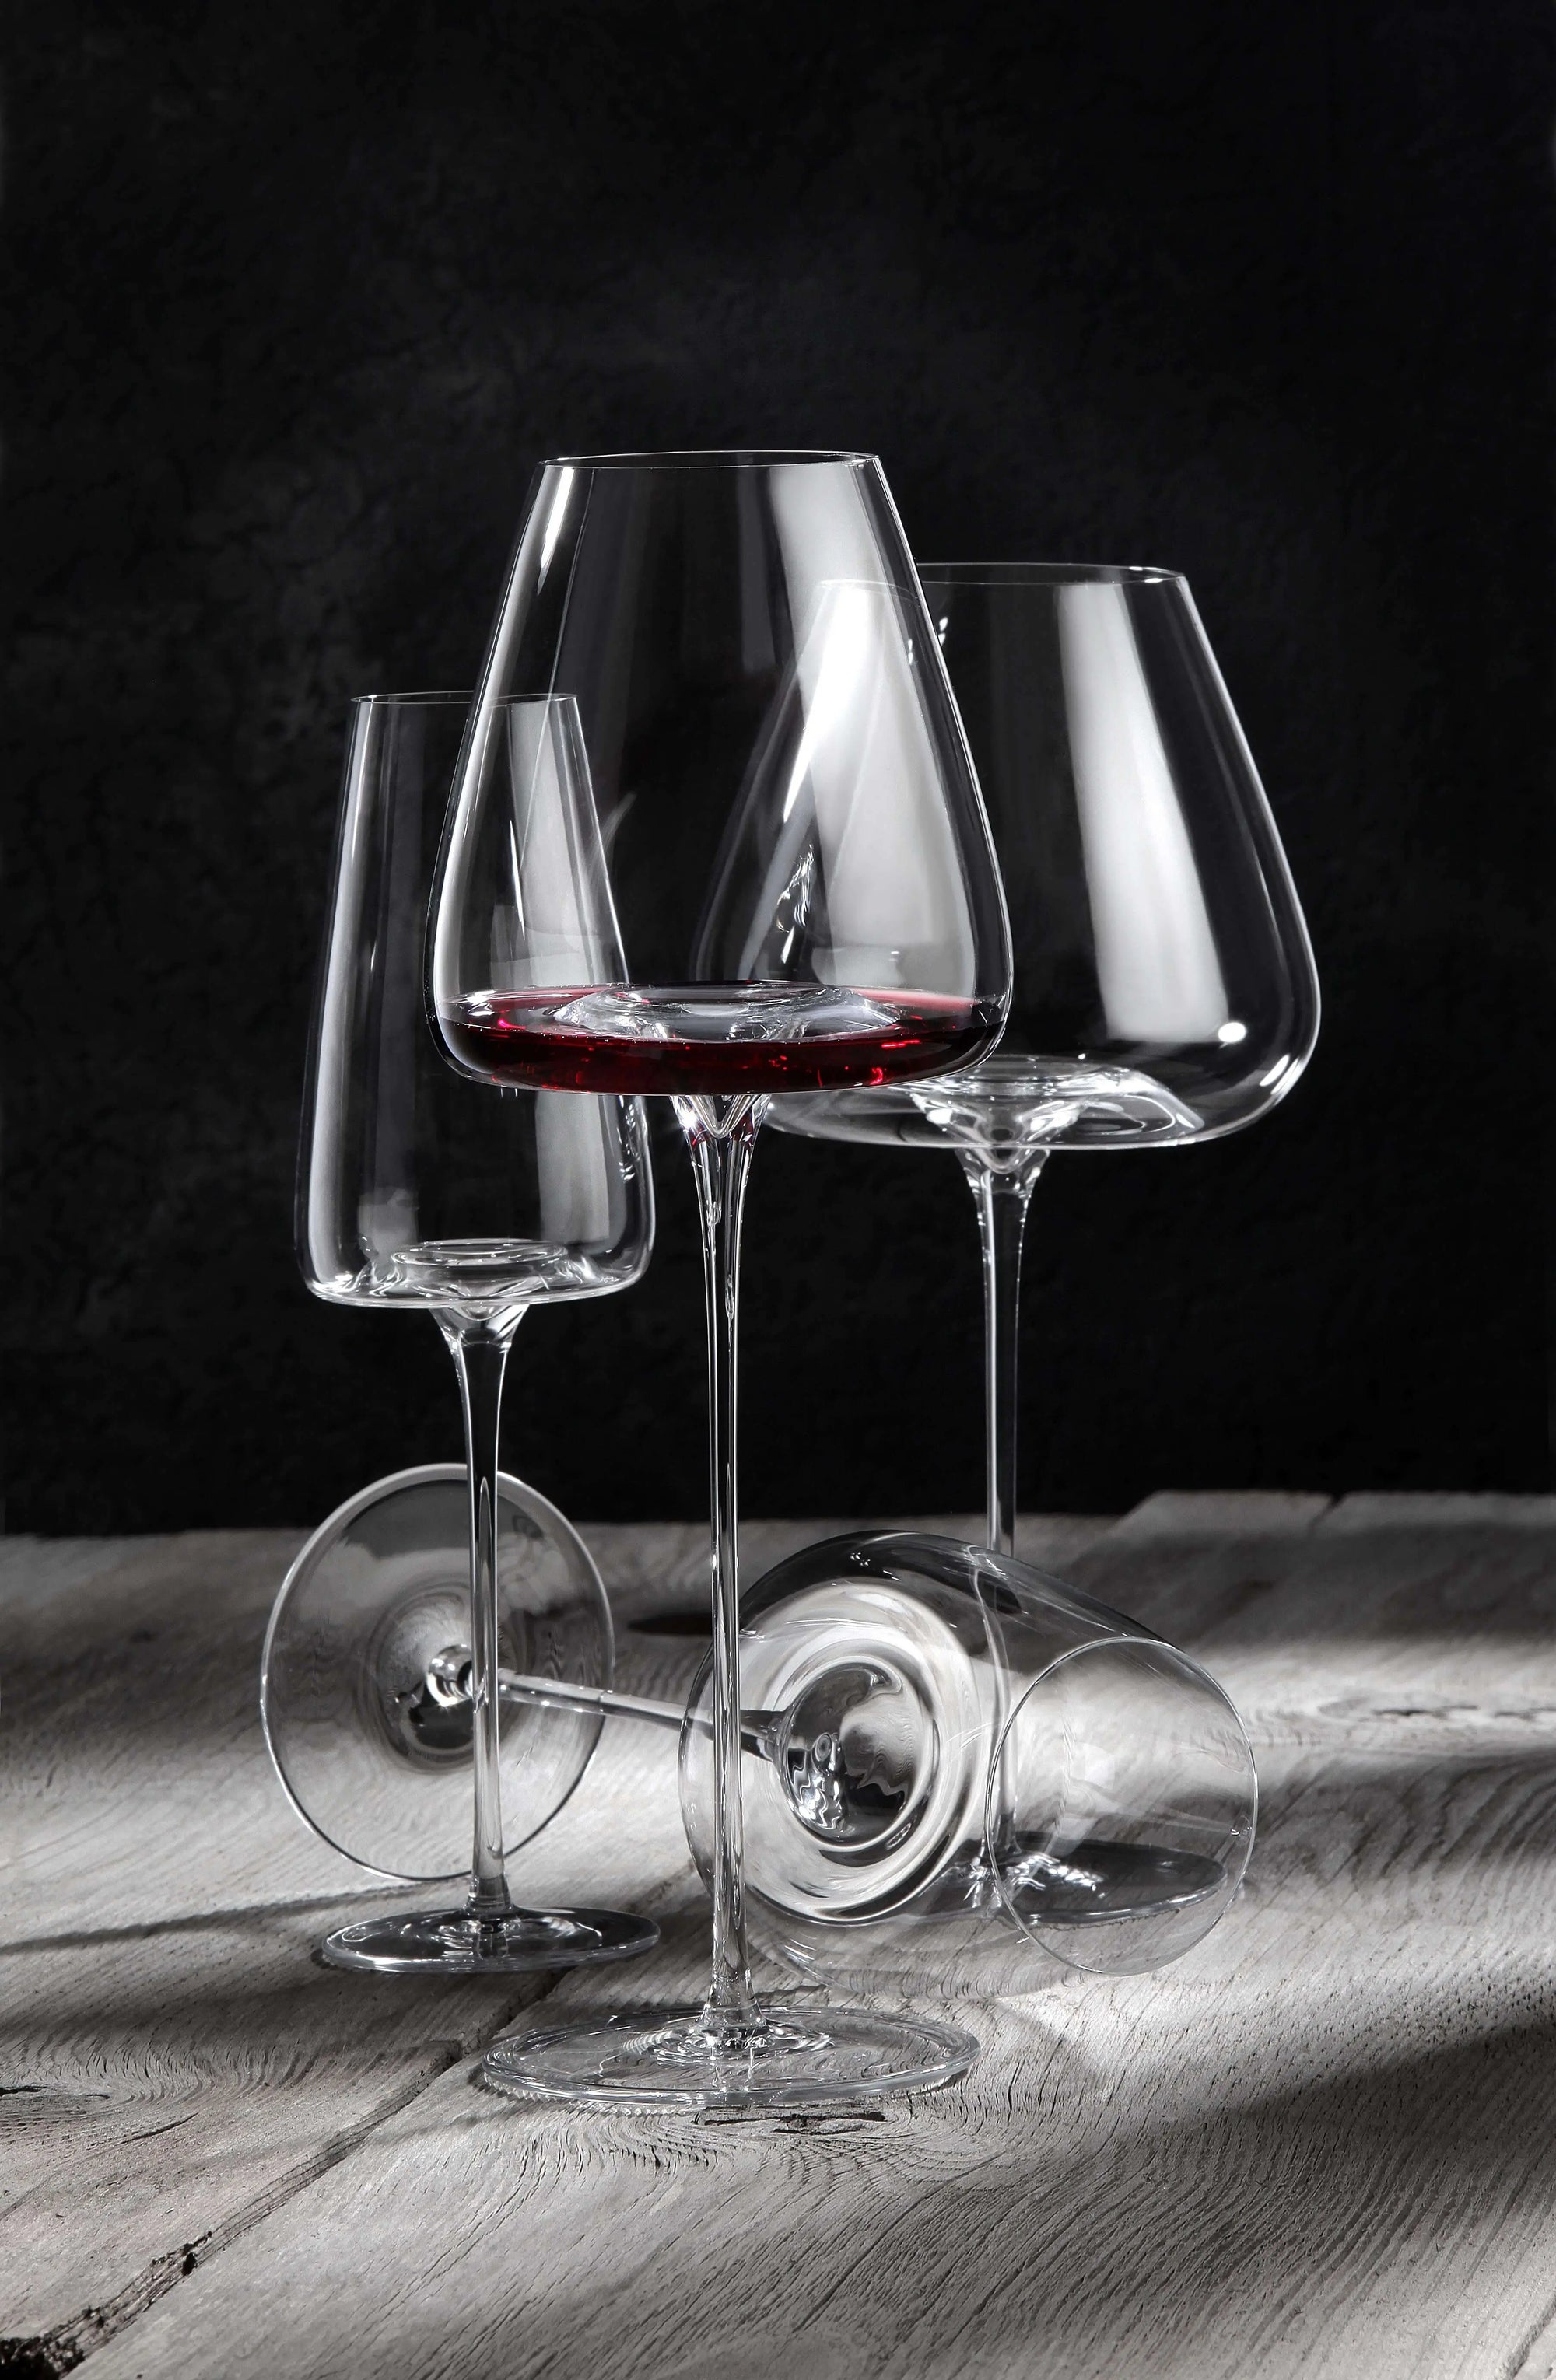 An extreme fresh character wine glass